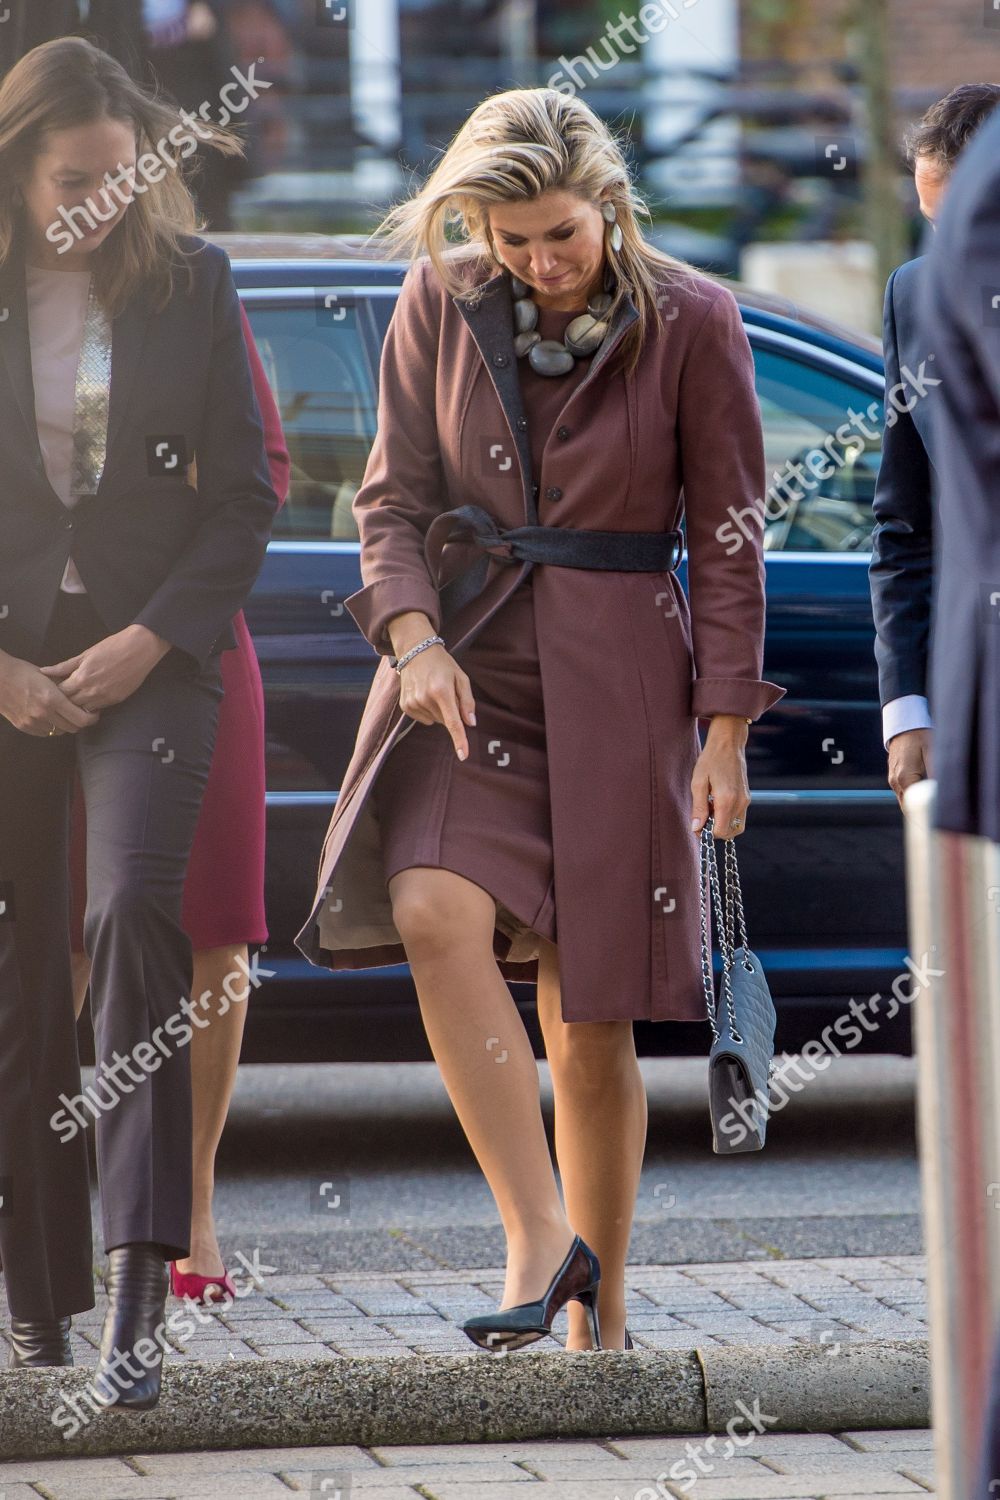 queen-maxima-visit-to-113-suicide-prevention-amsterdam-the-netherlands-shutterstock-editorial-9958871d.jpg